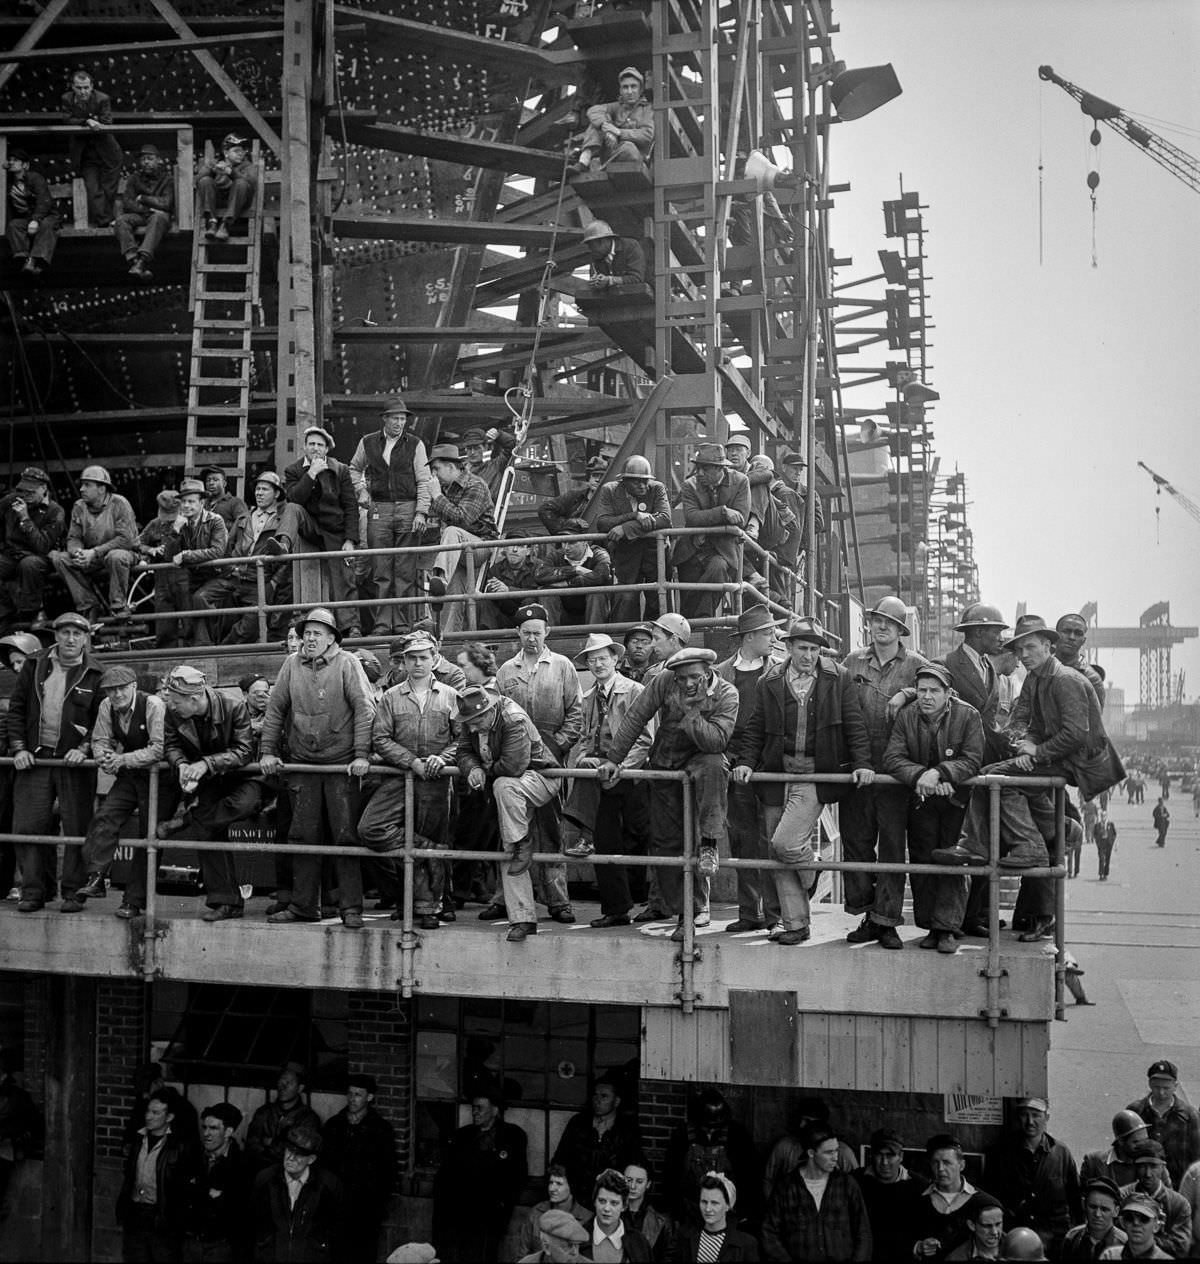 Workers gather to watch a launching ceremony